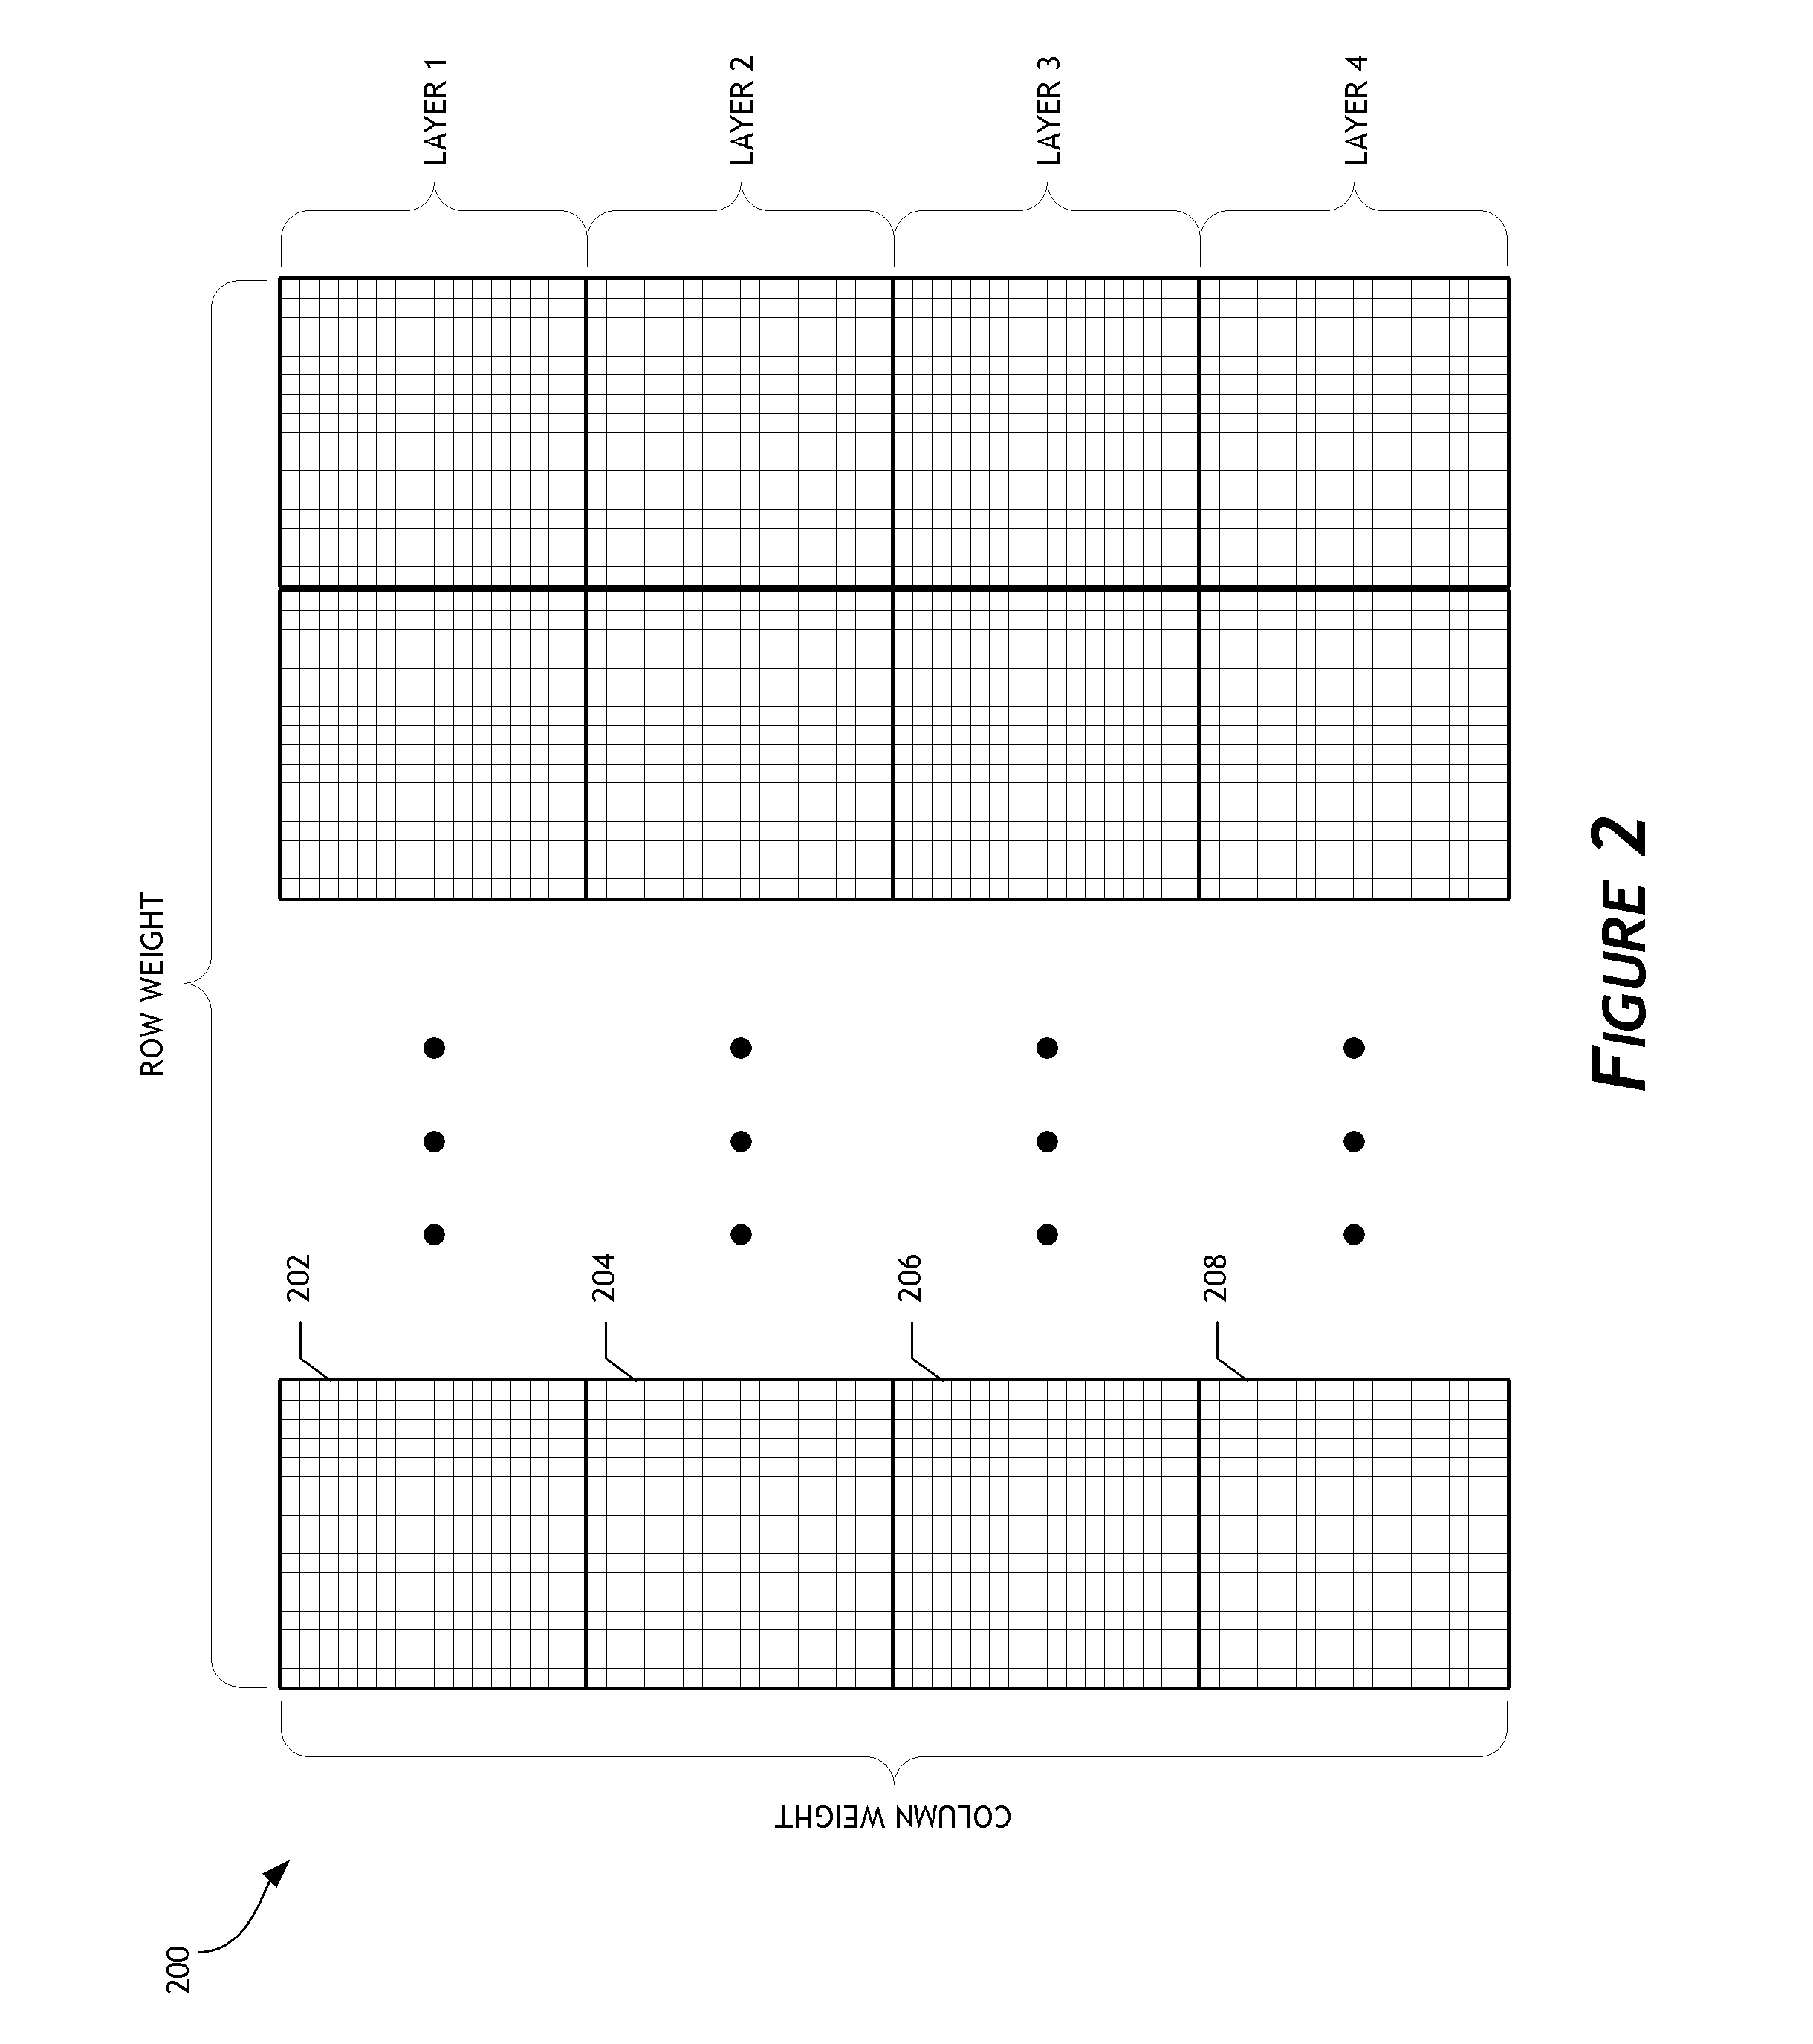 Decoder supporting multiple code rates and code lengths for data storage systems